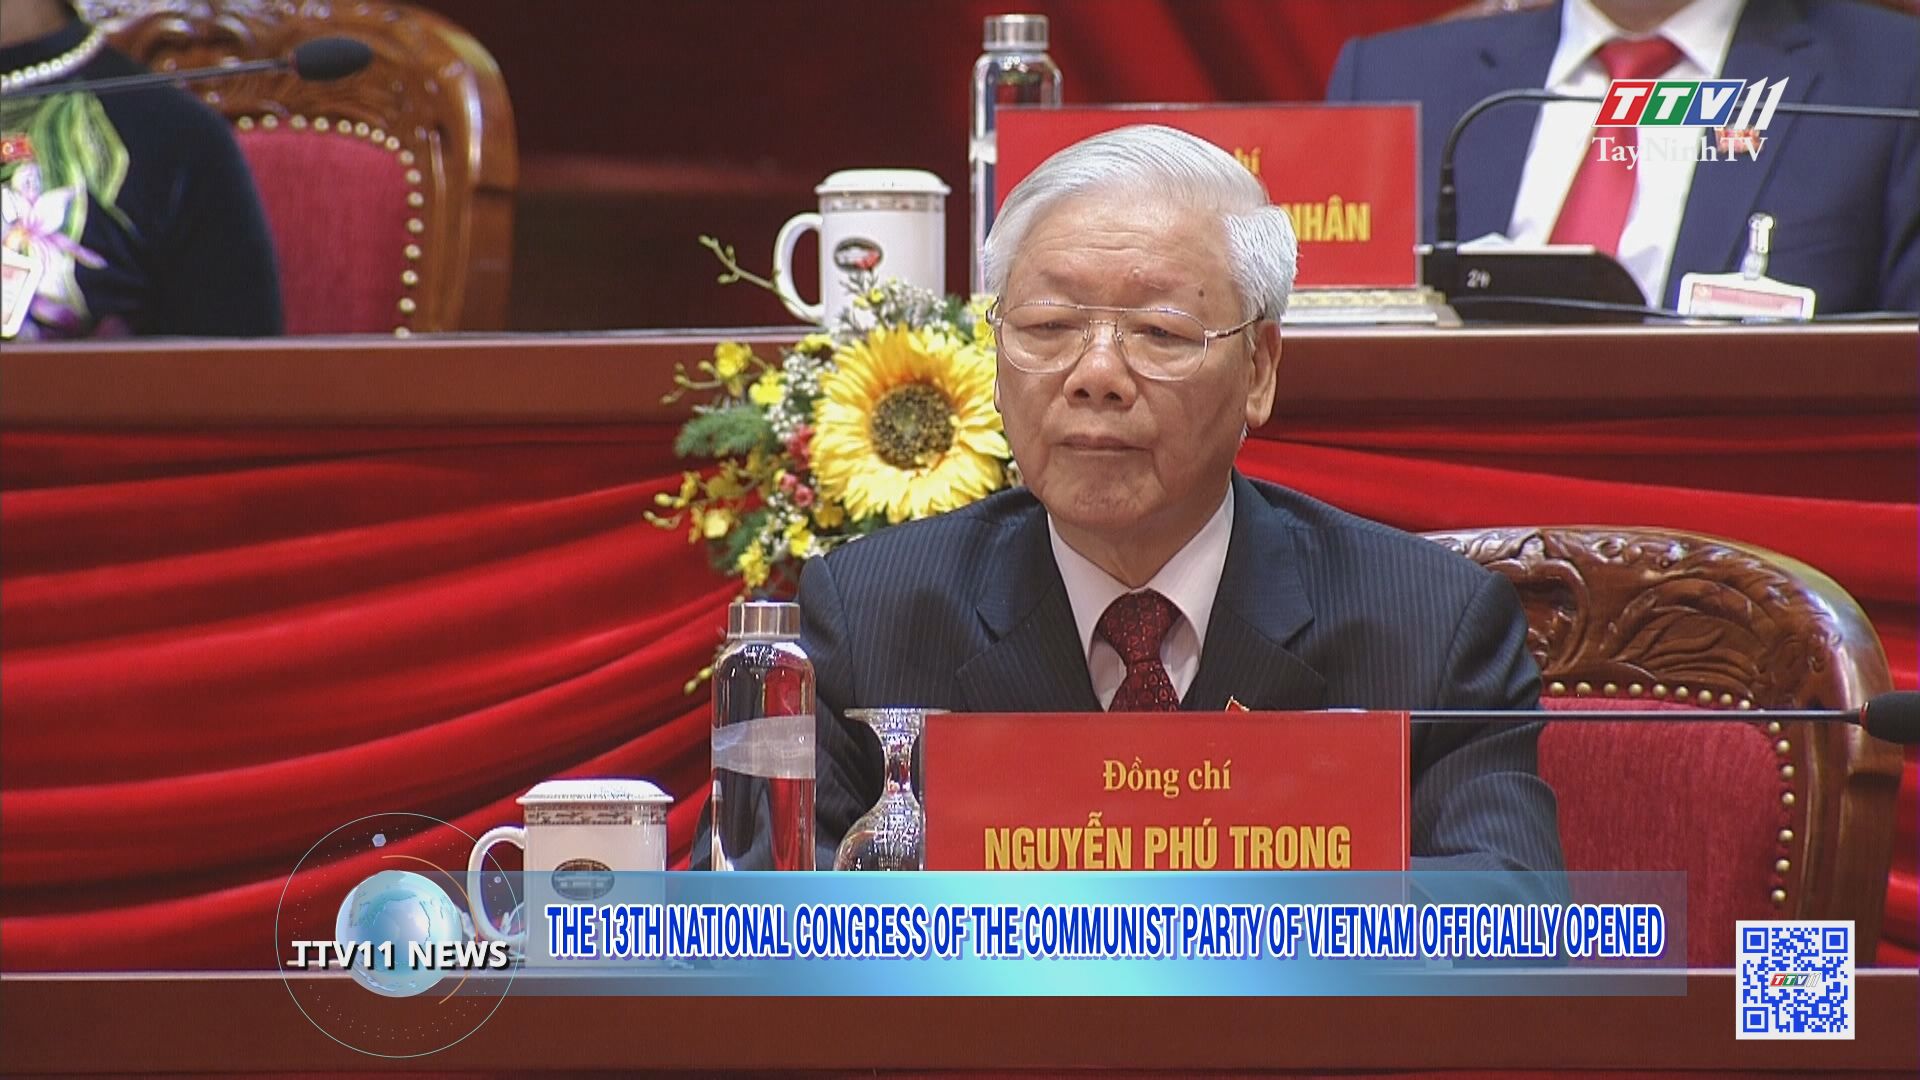 The 13th National Congress of the Communist Party of Vietnam officially opened | TTVNEWS | TayNinhTV Today